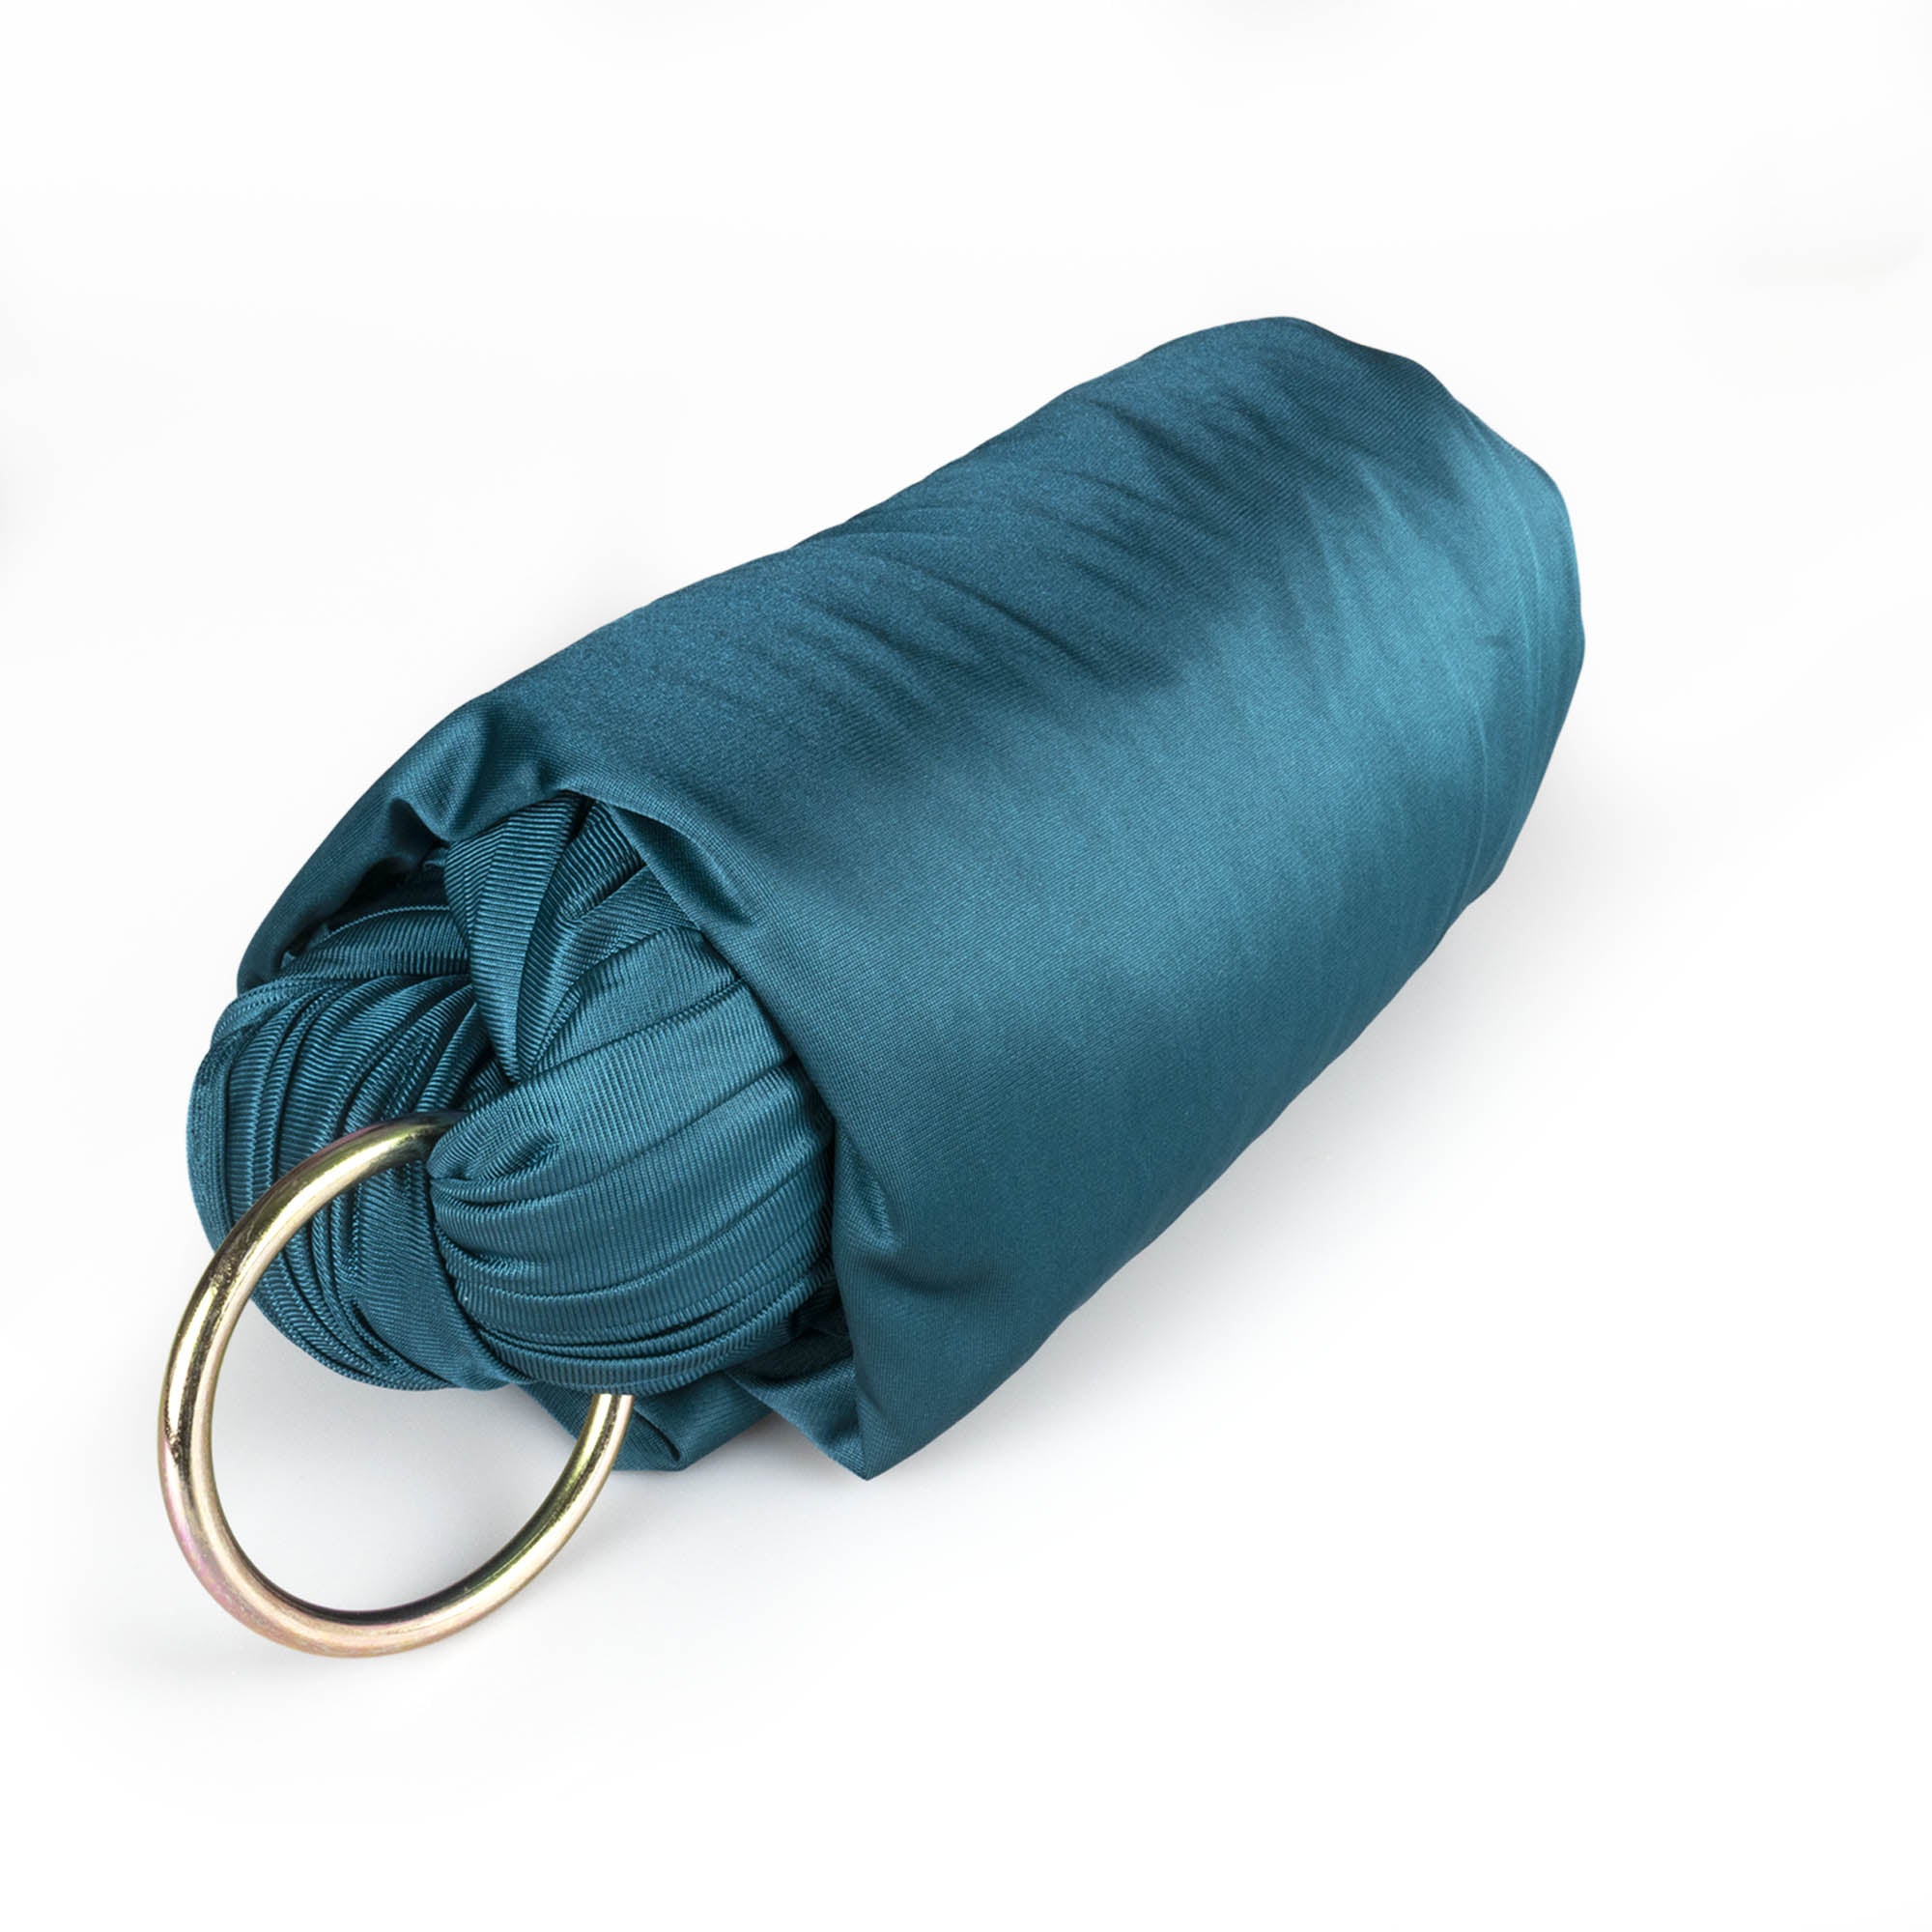 Pine green yoga hammock rolled up with ring attached